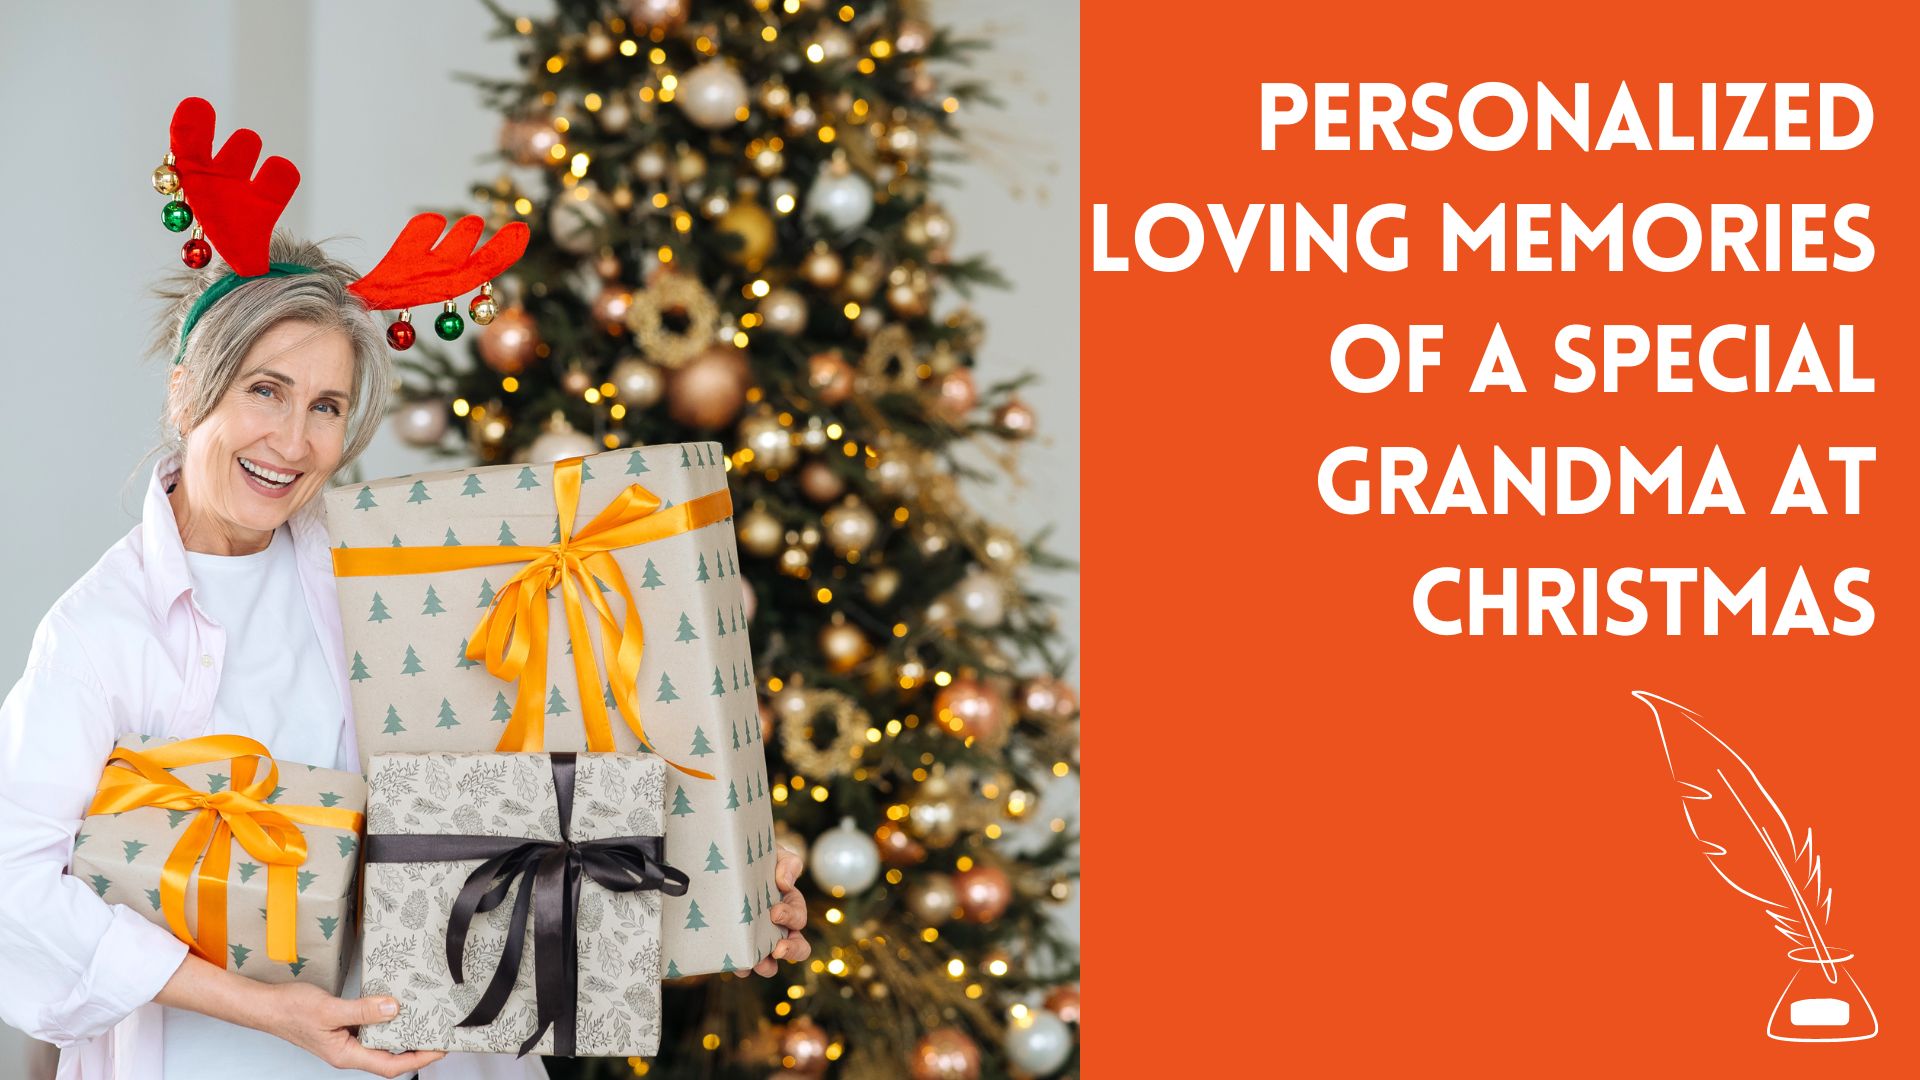 Personalized Loving Memories of a Special Grandma at Christmas